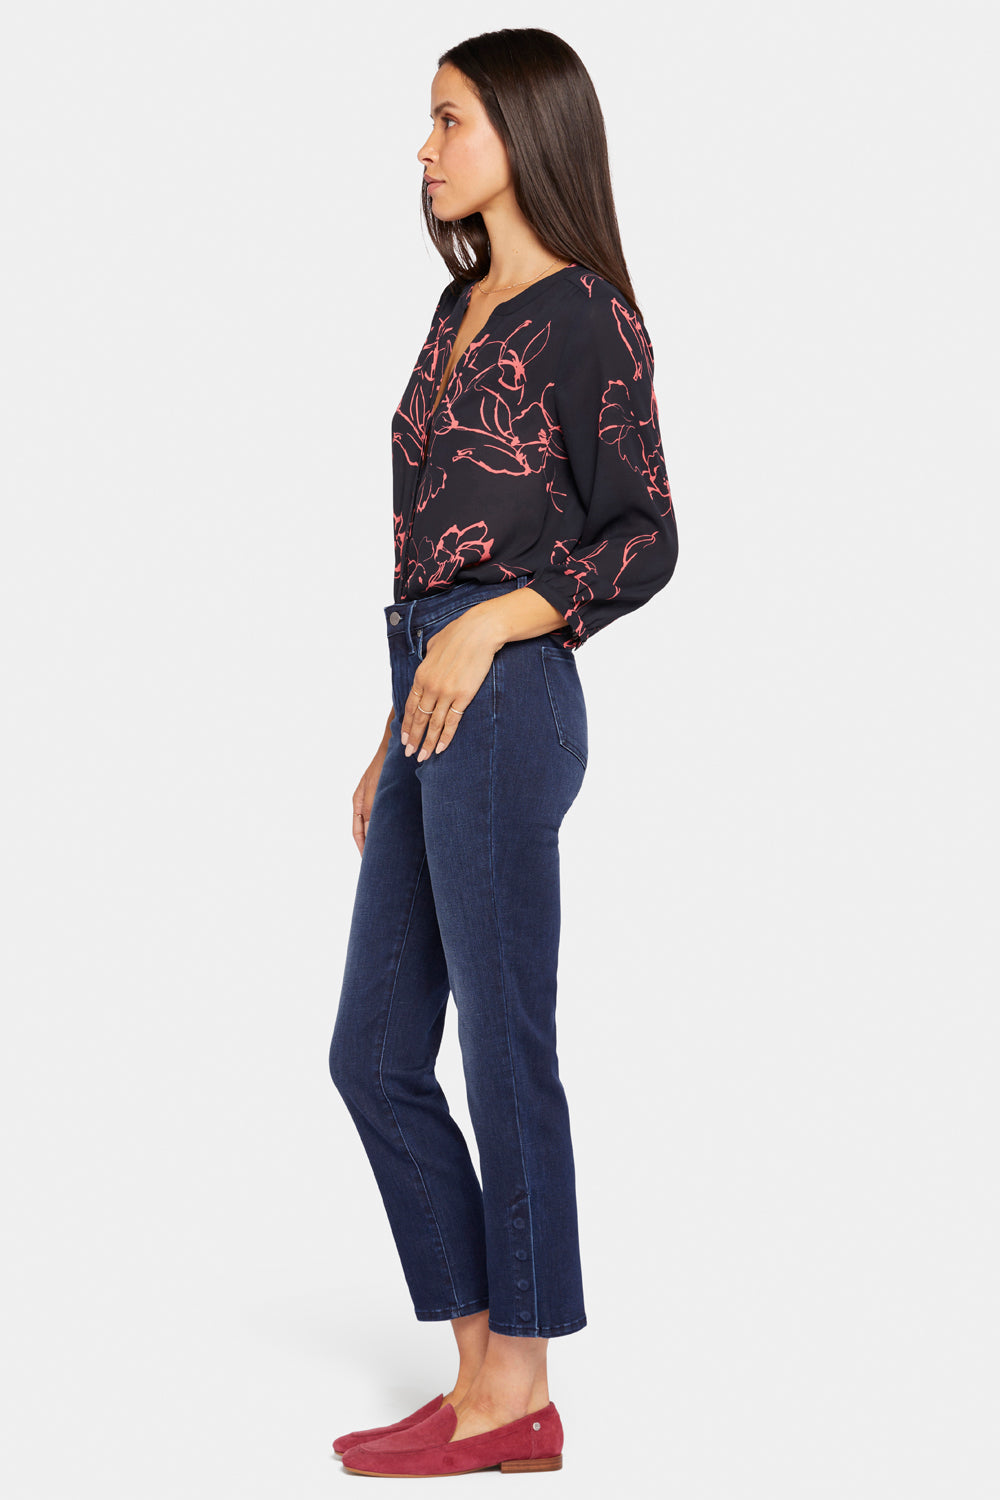 NYDJ Sheri Slim Ankle Jeans With Snap Side Plackets - Inspire